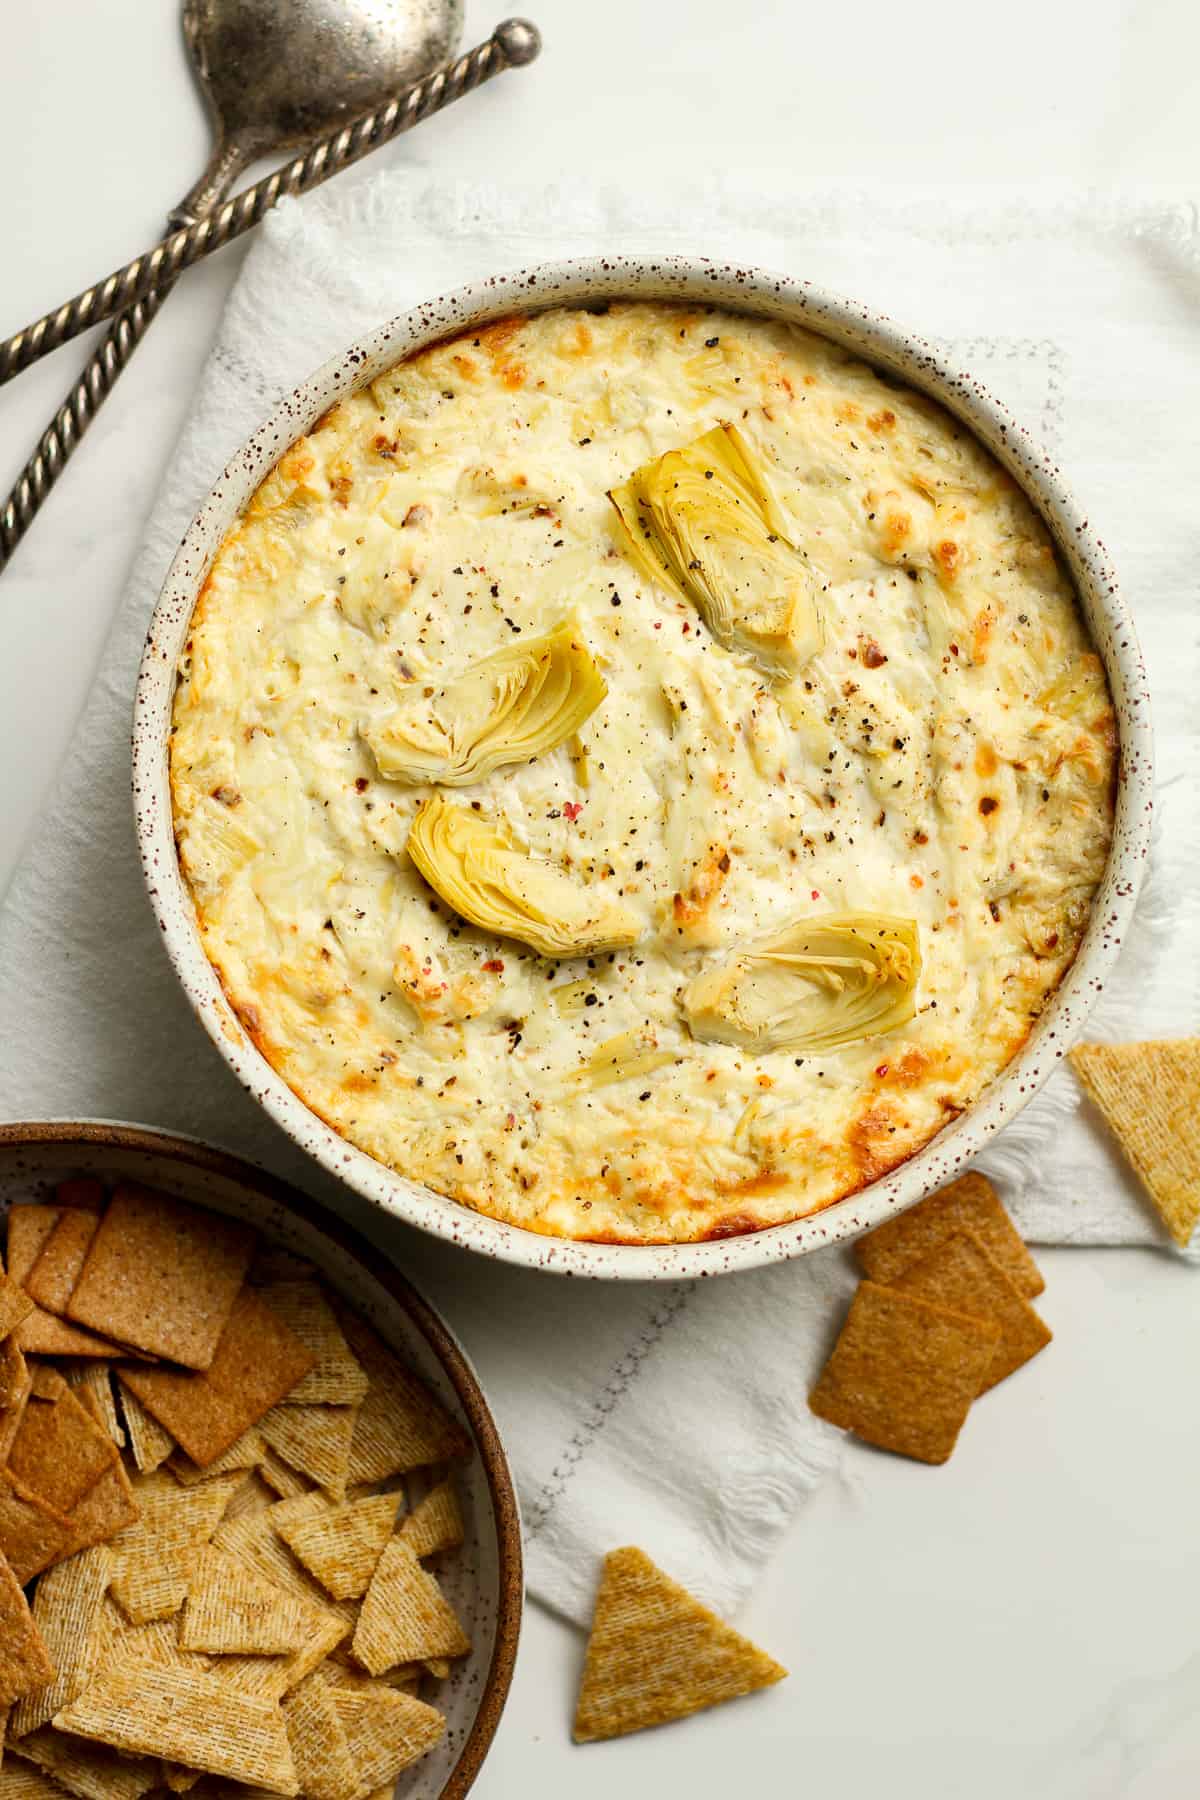 A bowl of the baked artichoke dip.